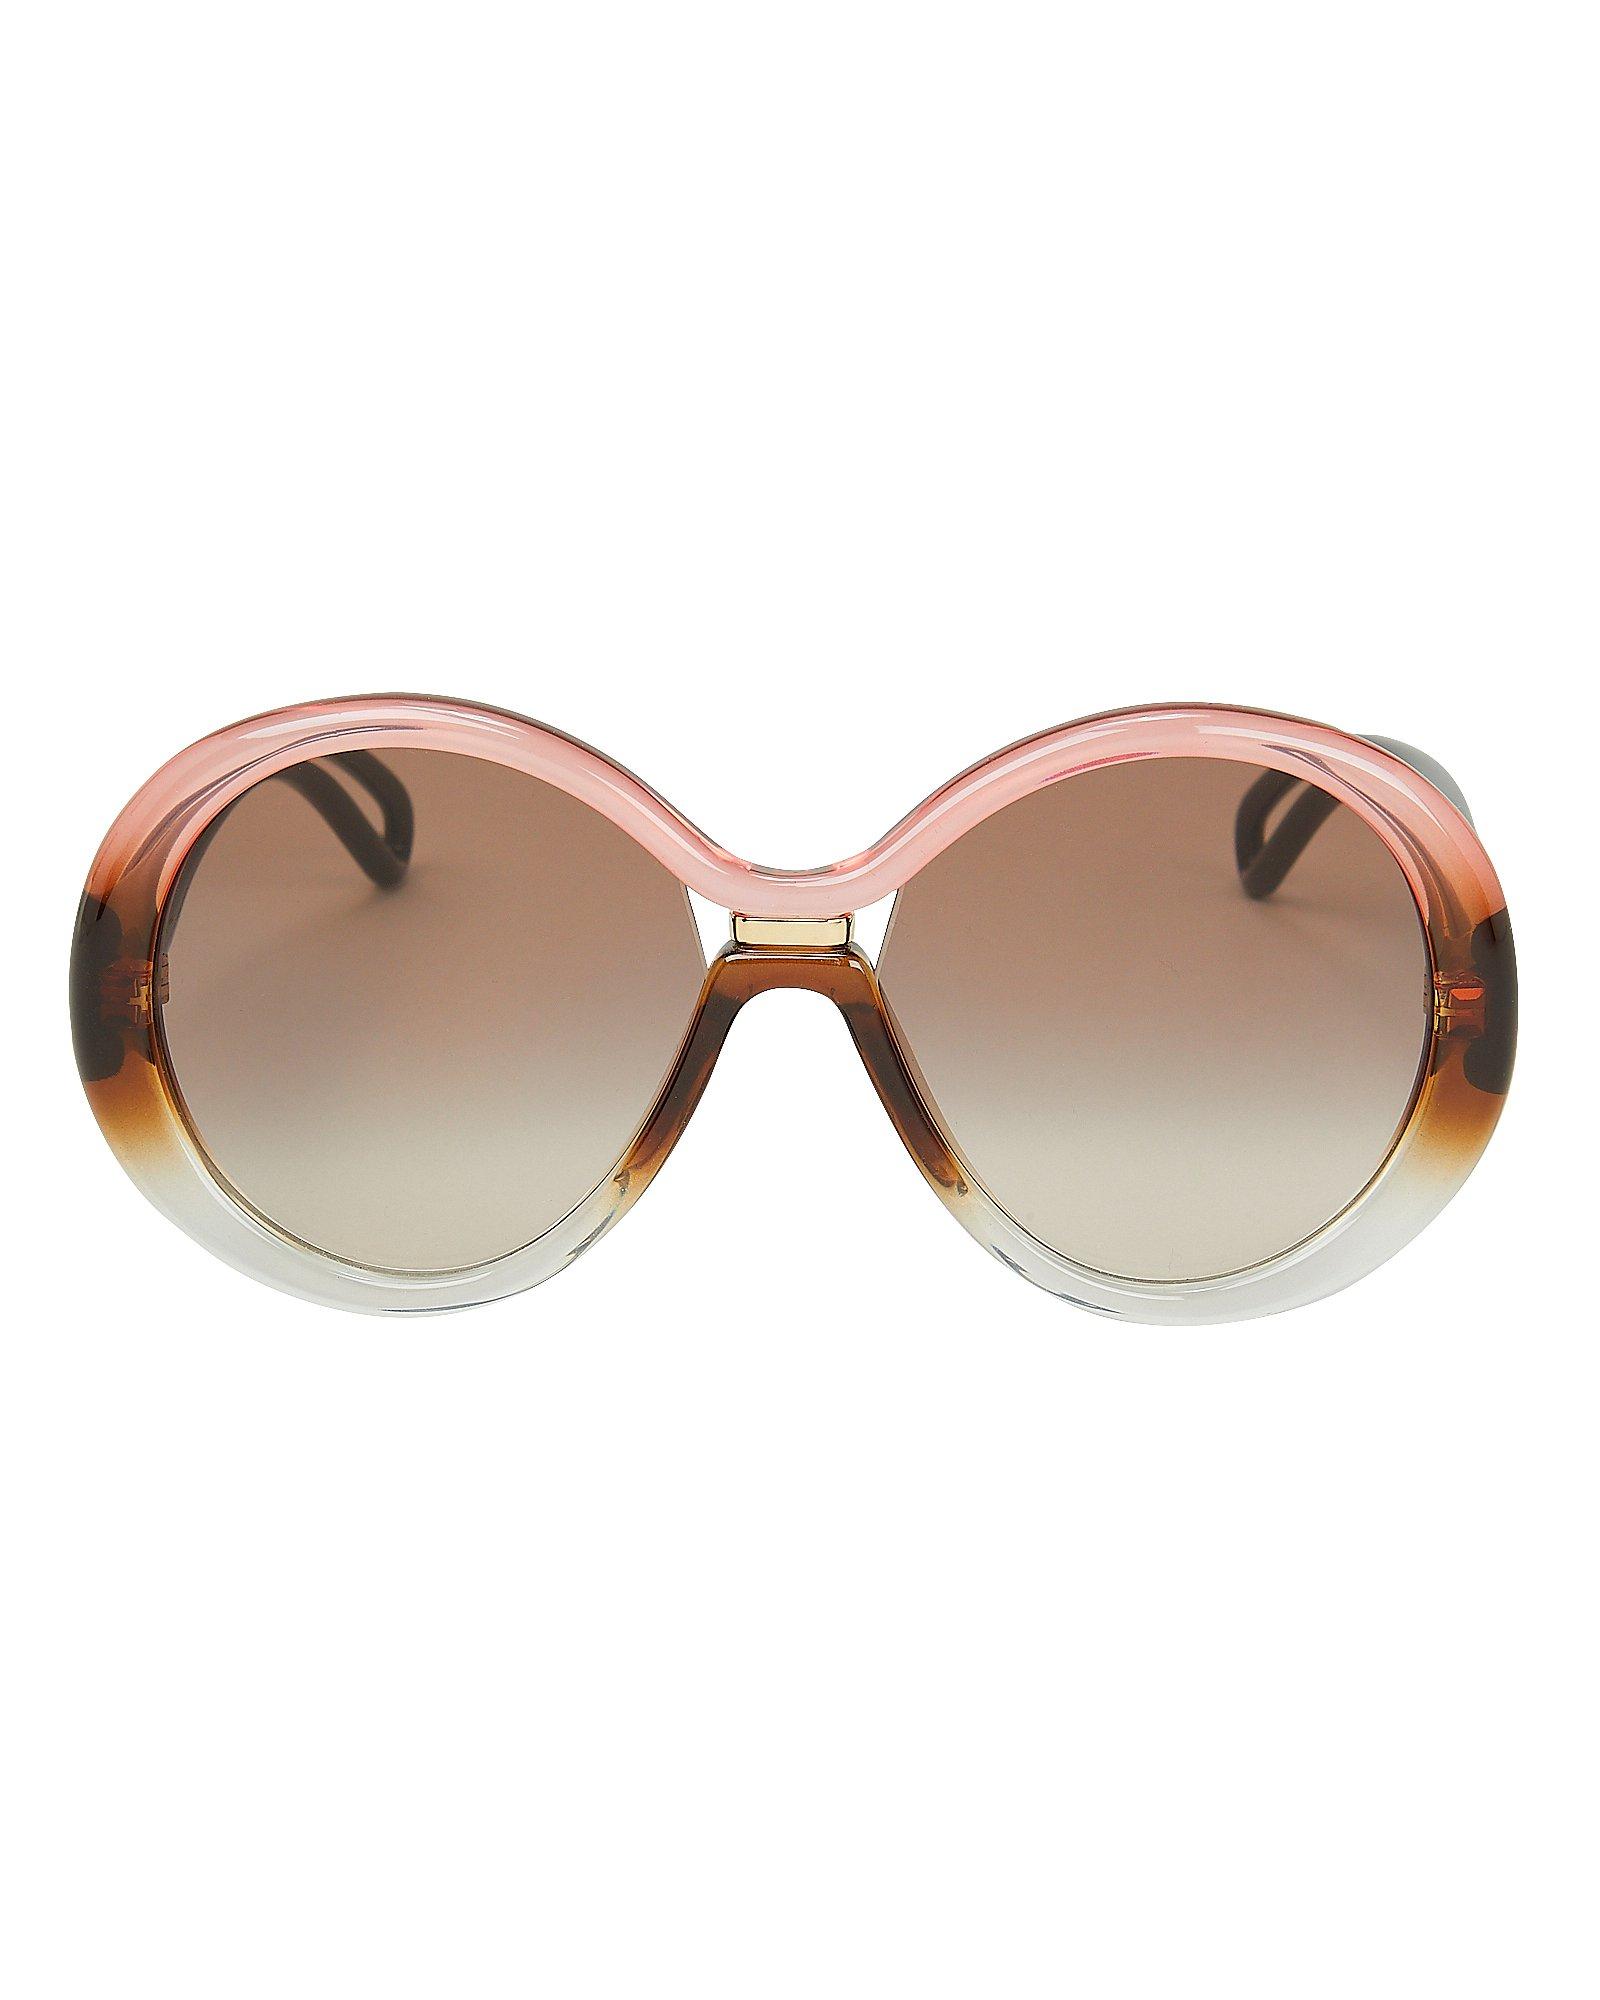 Givenchy 7105 Oversized Round Sunglasses in Pink - Lyst